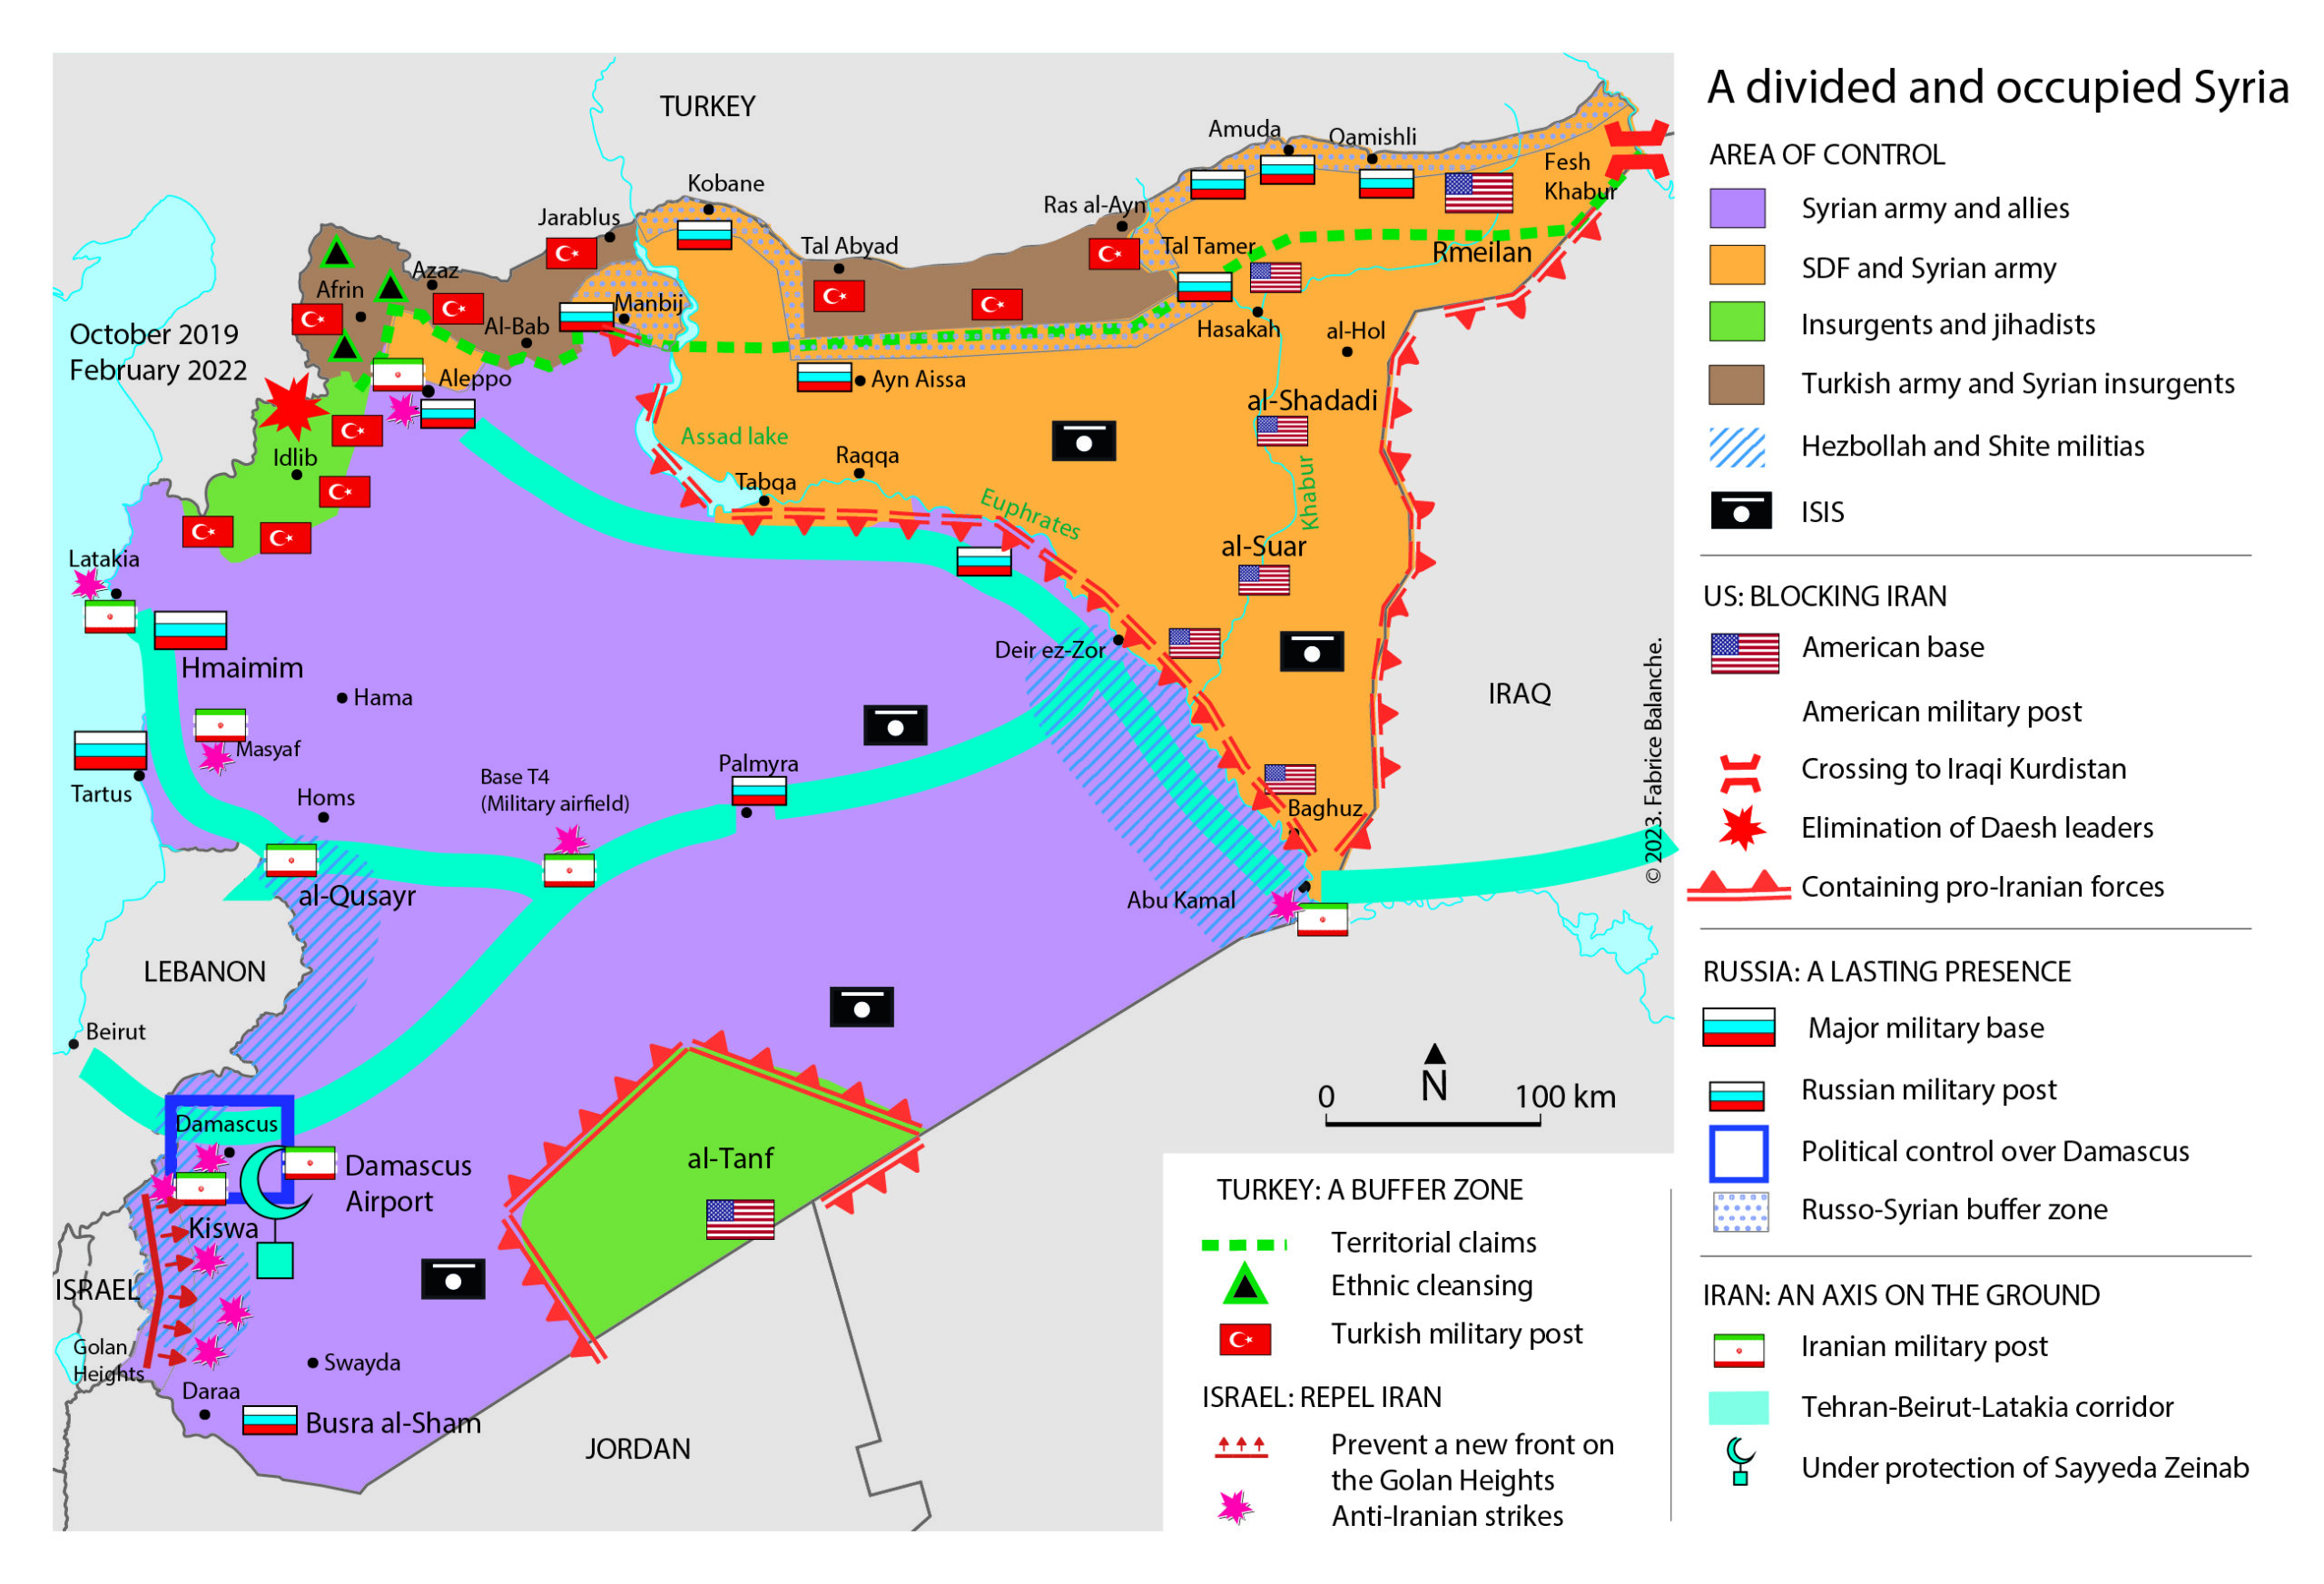 Divided an occupied Syria